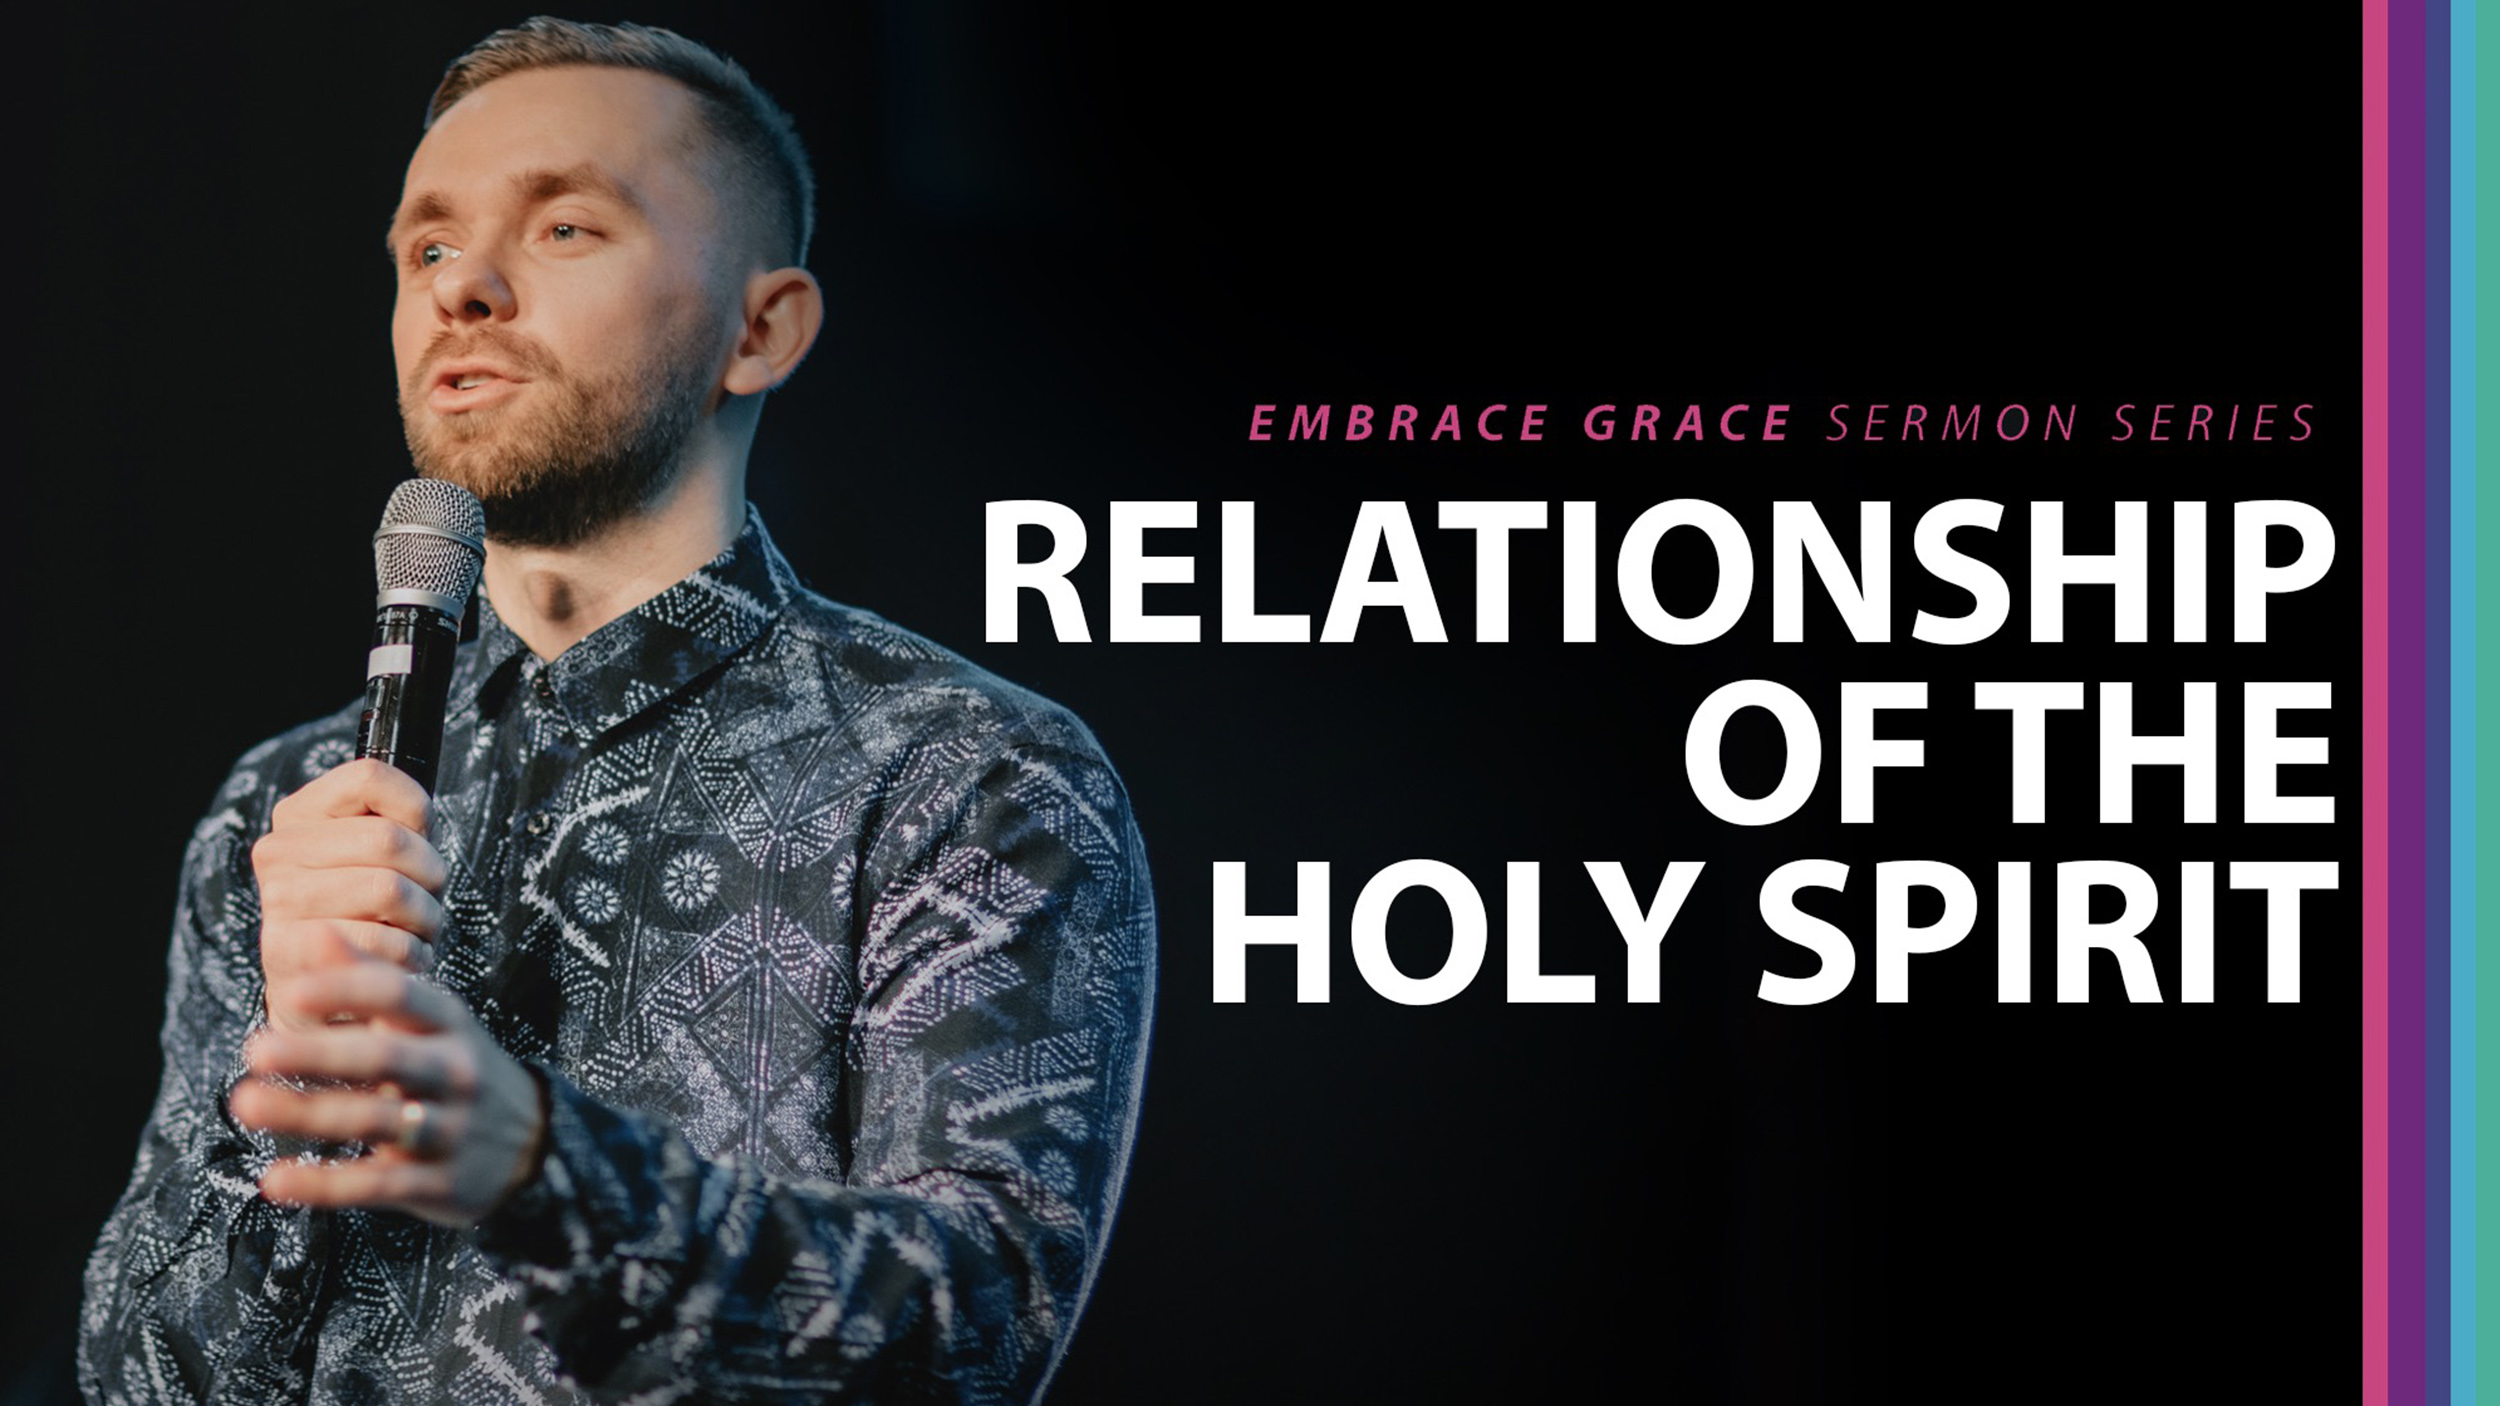 Featured image for “Relationship of the Holy Spirit”